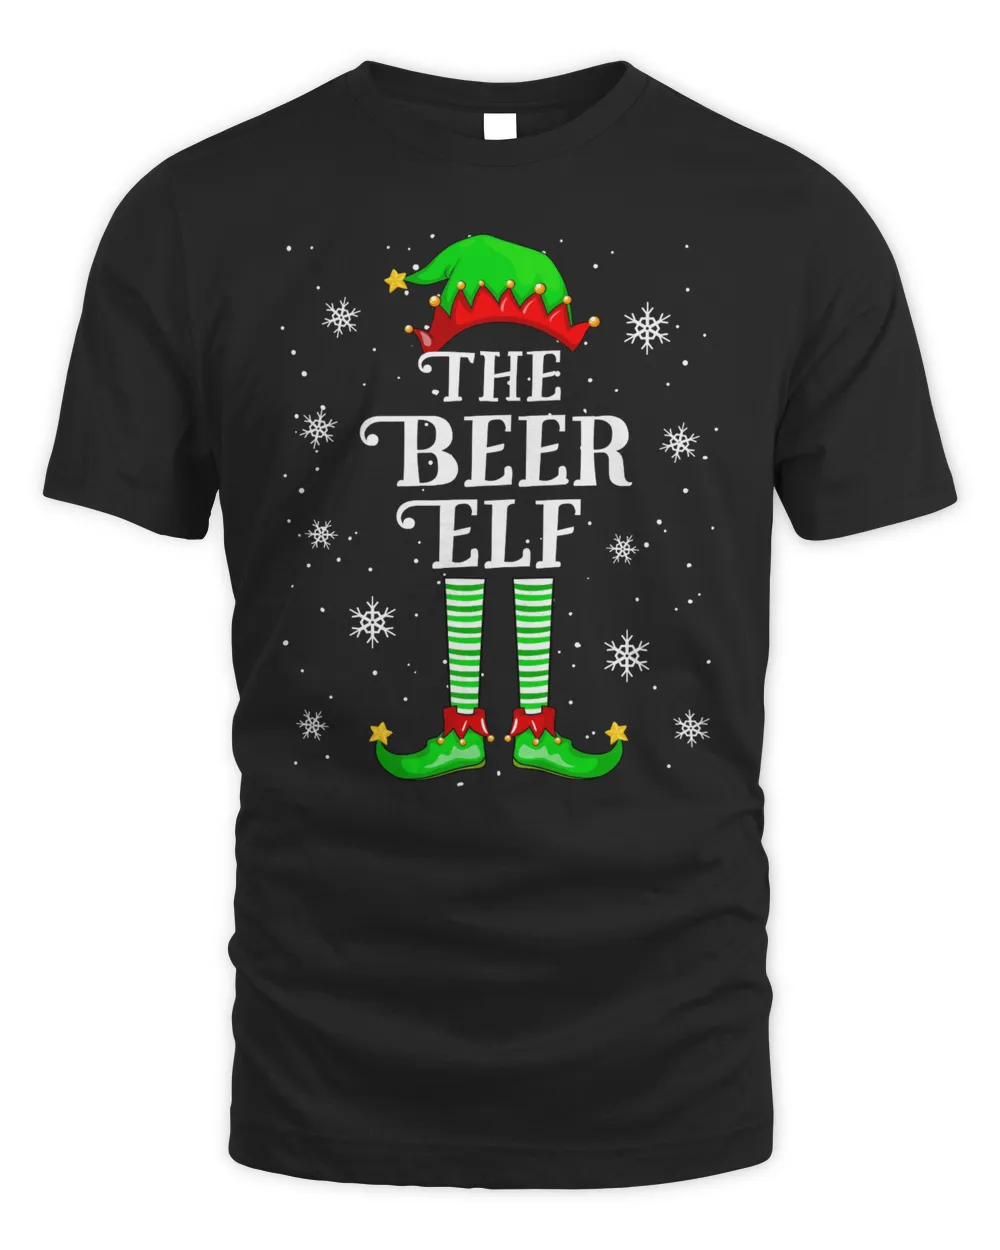 The Beer Elf Family Matching Group Christmas Party Pajama Xmas Gift